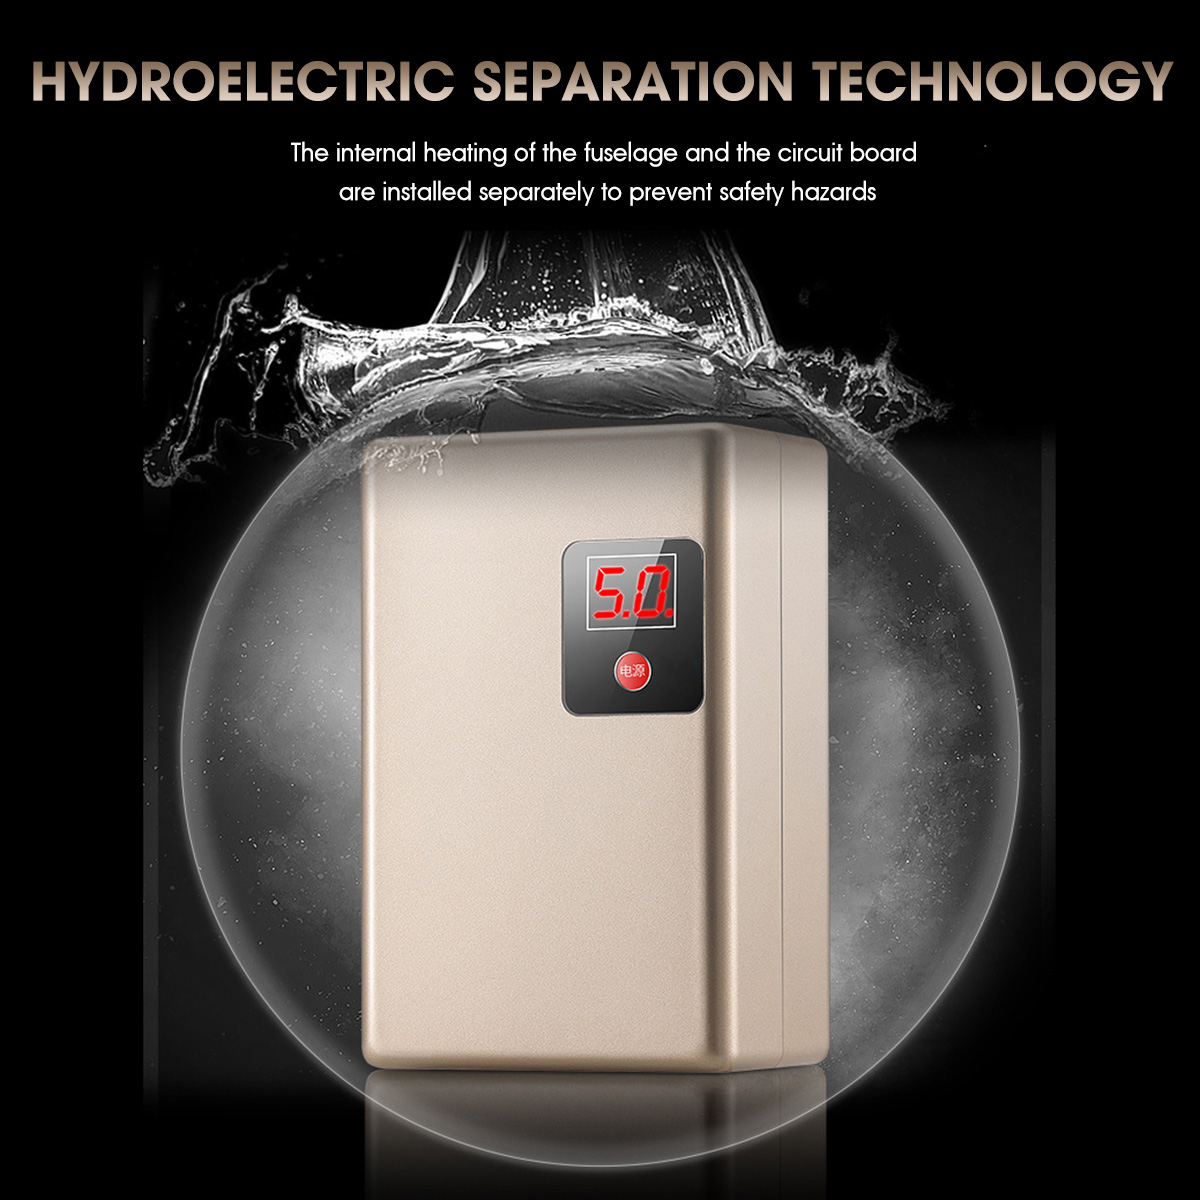 220V-3800W-Shower-Instant-Water-Heater-Tankless-Water-Heater-Electric-Heating-Instant-Hot-Water-for--1582848-3